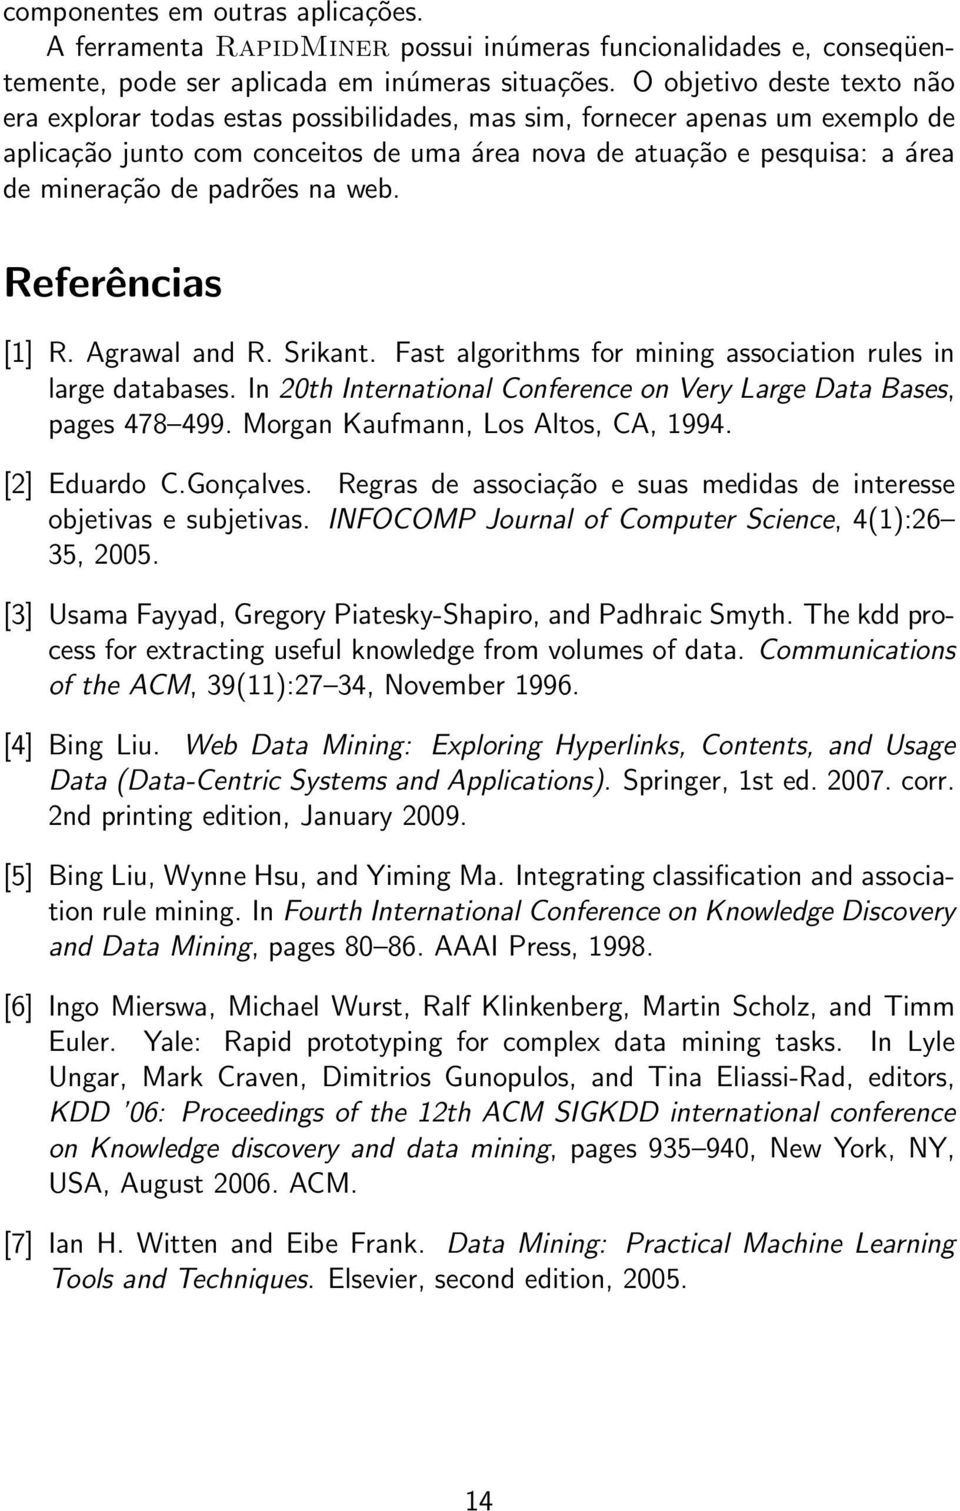 padrões na web. Referências [1] R. Agrawal and R. Srikant. Fast algorithms for mining association rules in large databases. In 20th International Conference on Very Large Data Bases, pages 478 499.